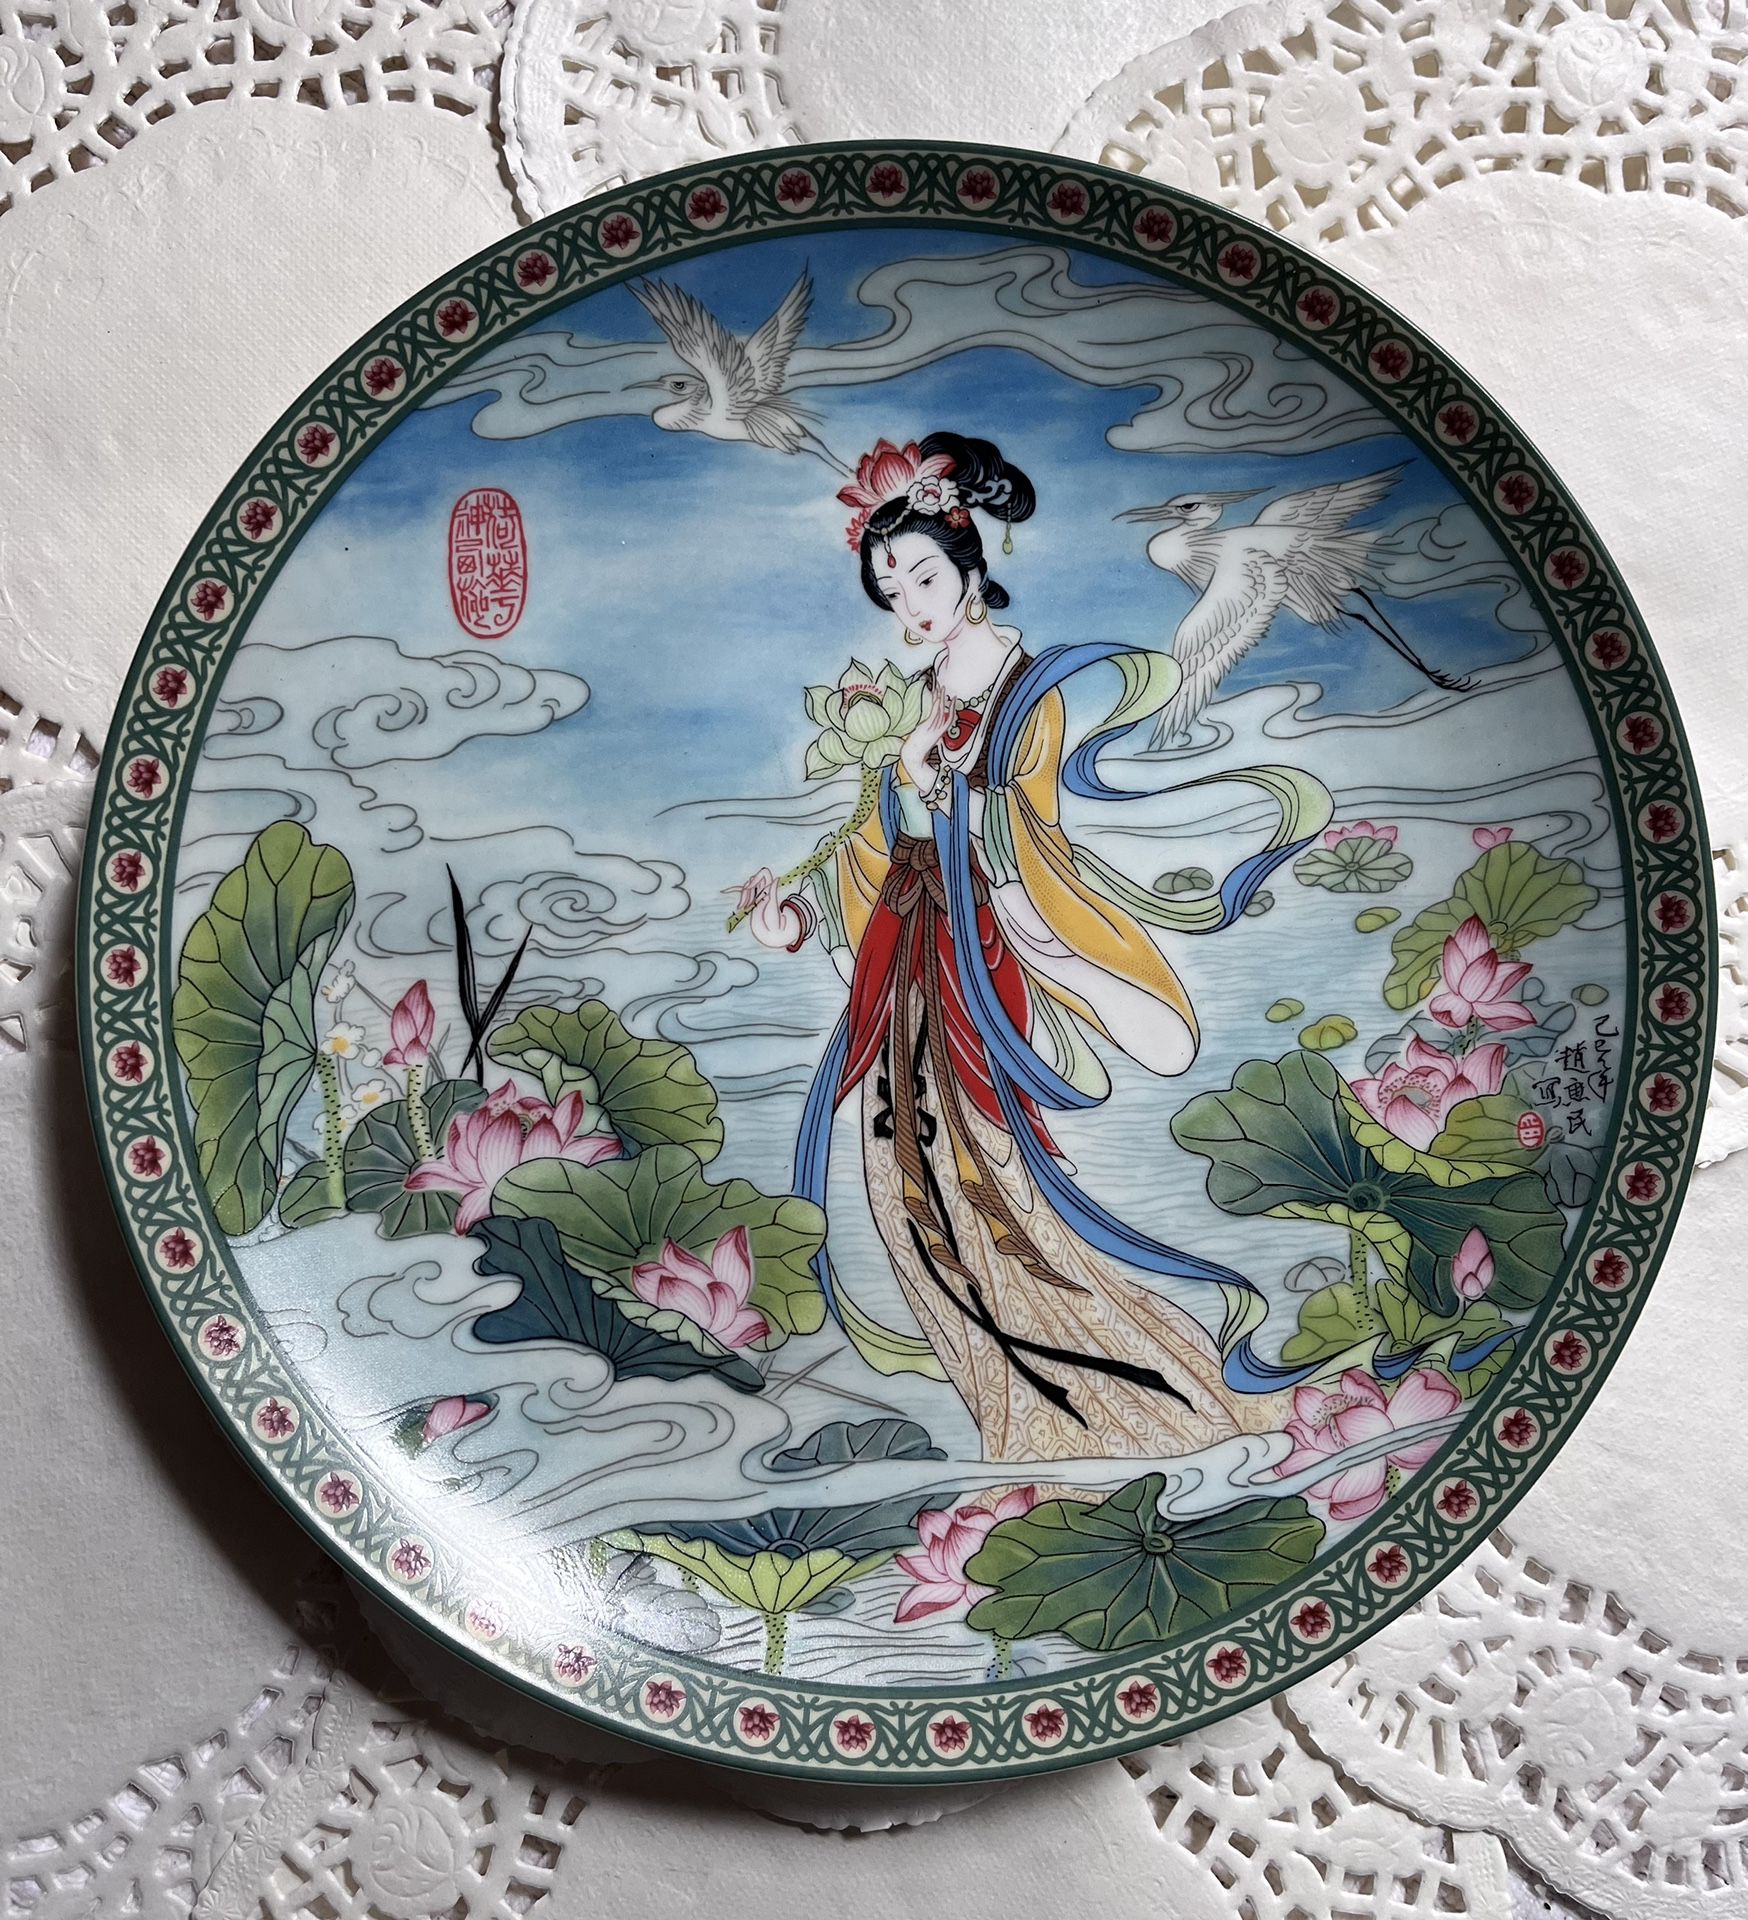 Chinese Imperial Jingdezhen Porcelain Plate 1991 Lotus Flower Goddesses of China